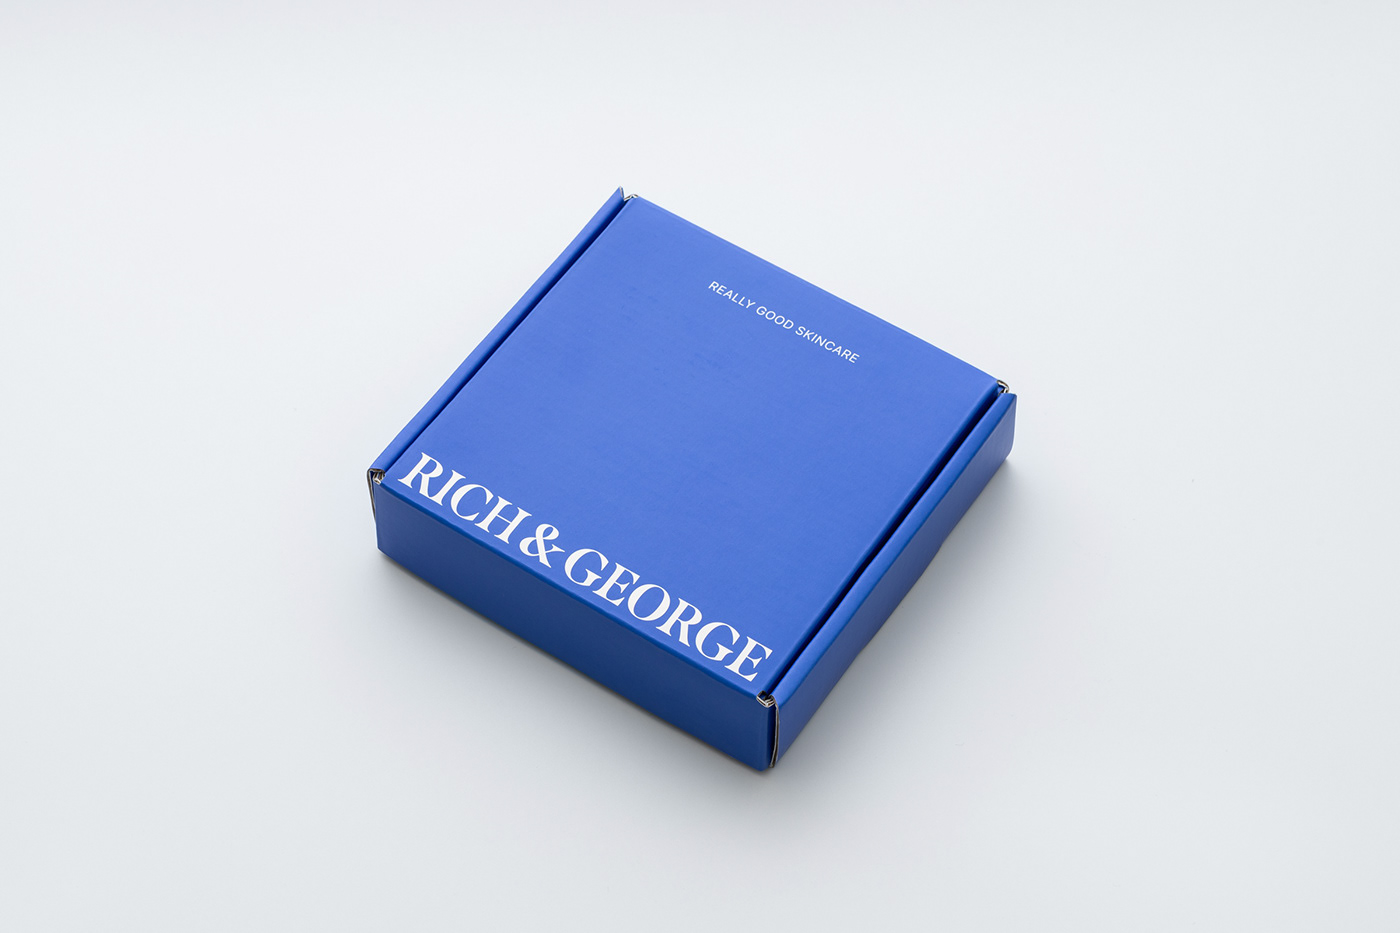 Blue mailer box with white serif font branding on the exterior